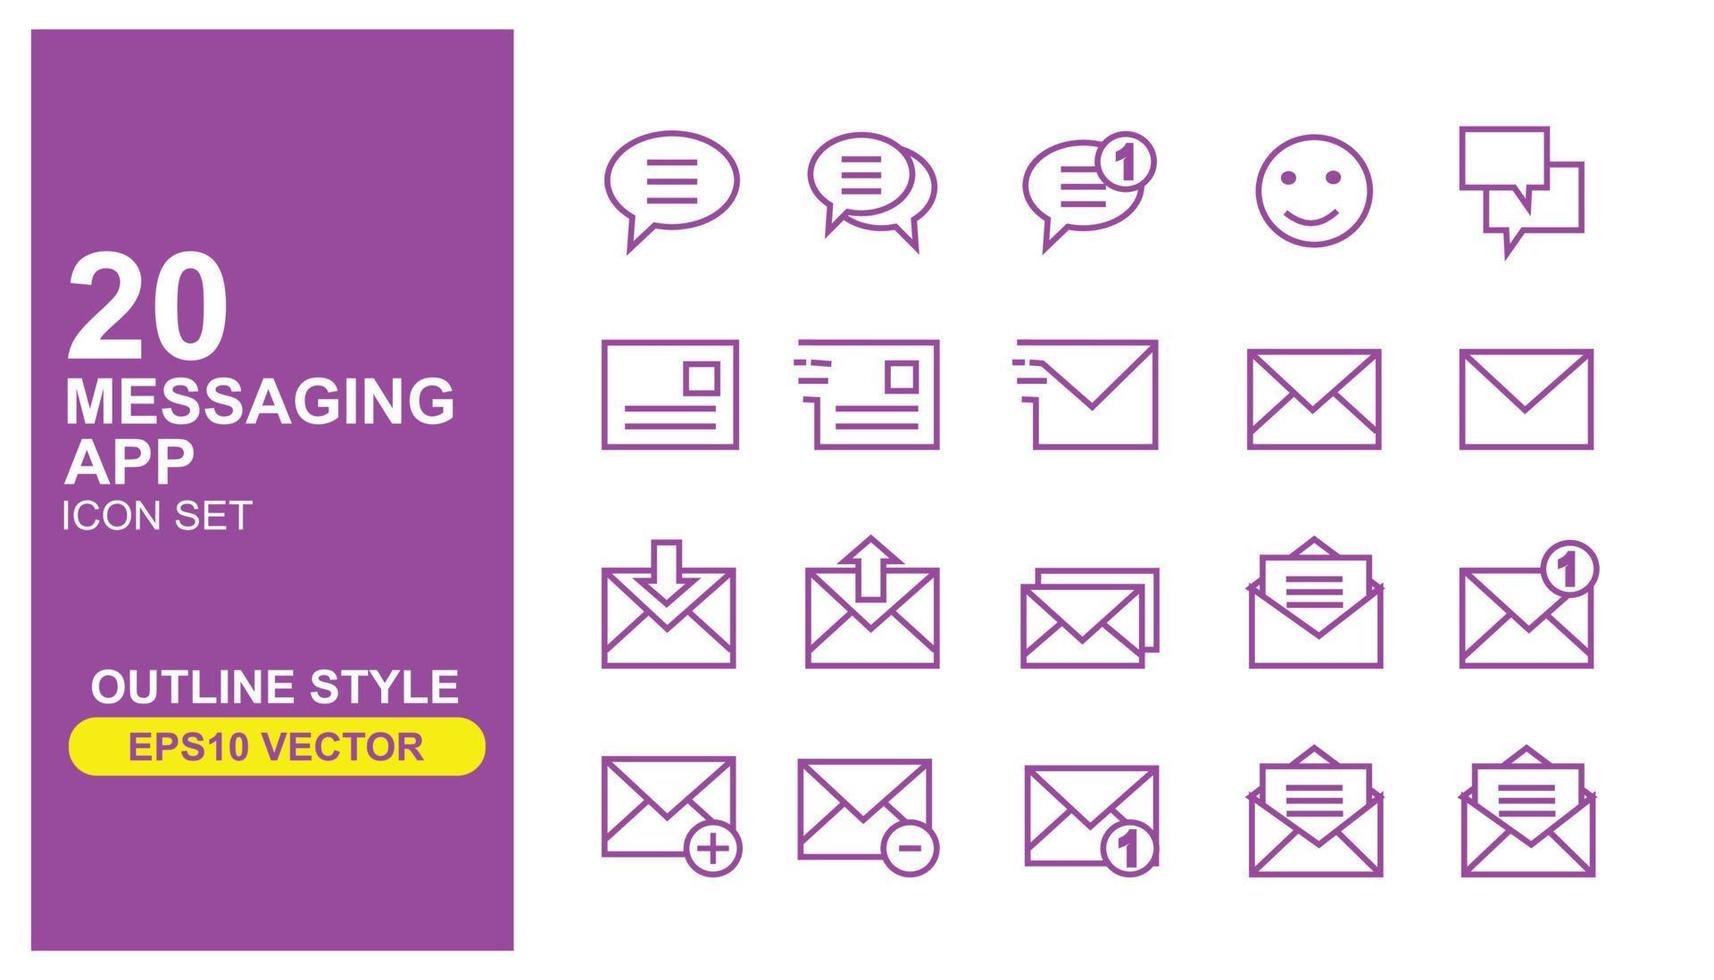 Messaging app icon set. Suitable for user interface design elements of chat and messaging applications. An elaborated collection of message and email icons. Editable vector. EPS10. Illustration vector